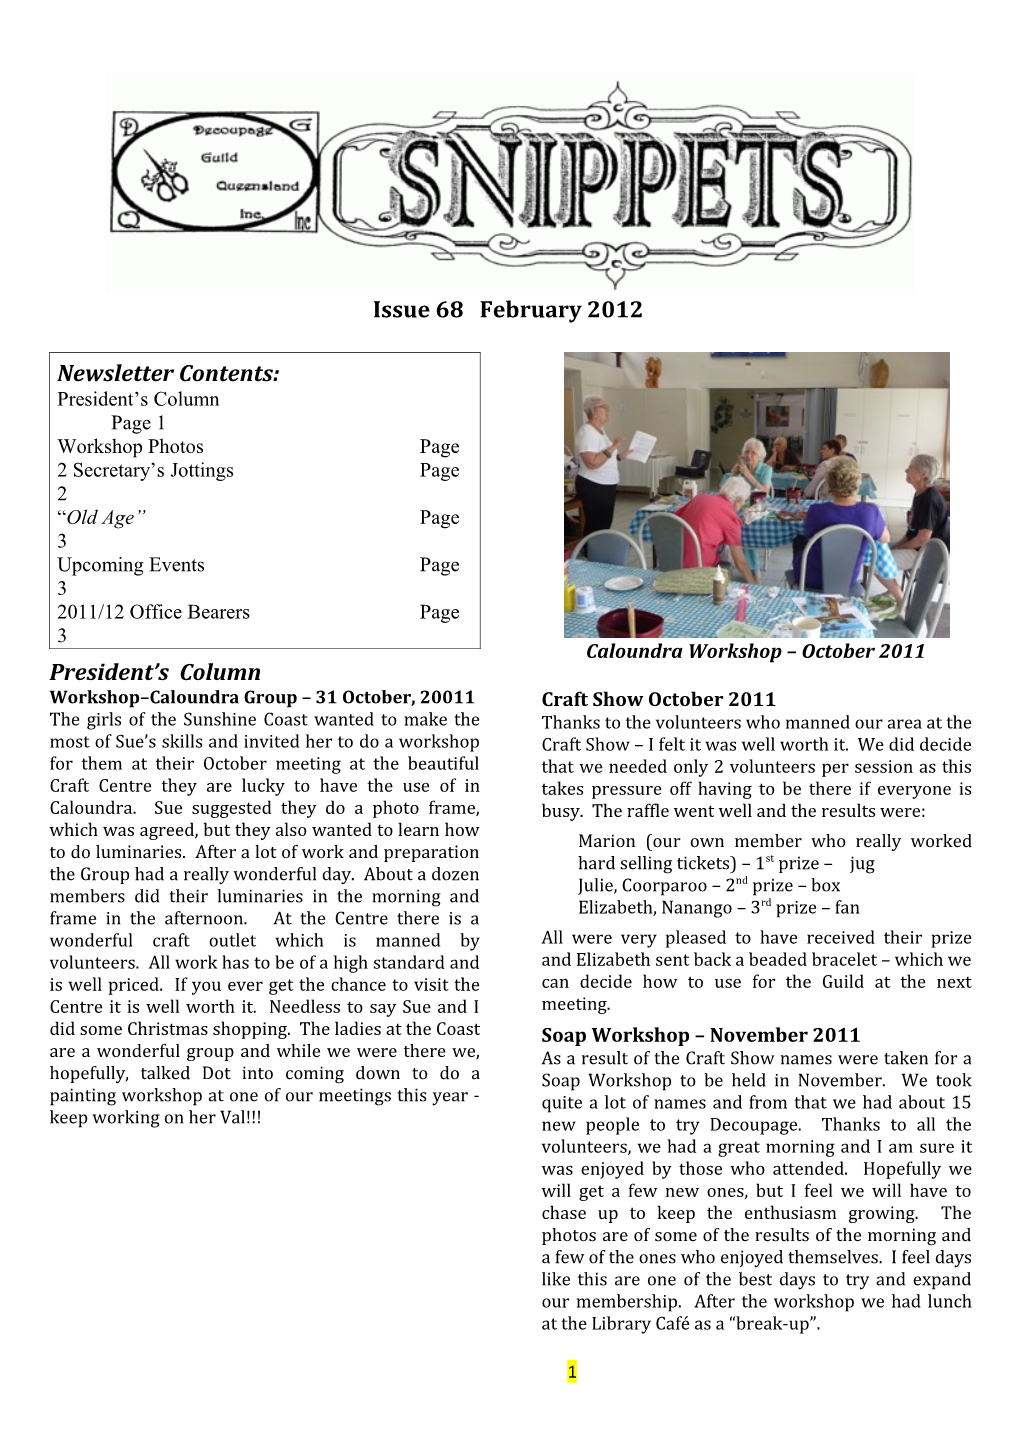 Newsletter Contents